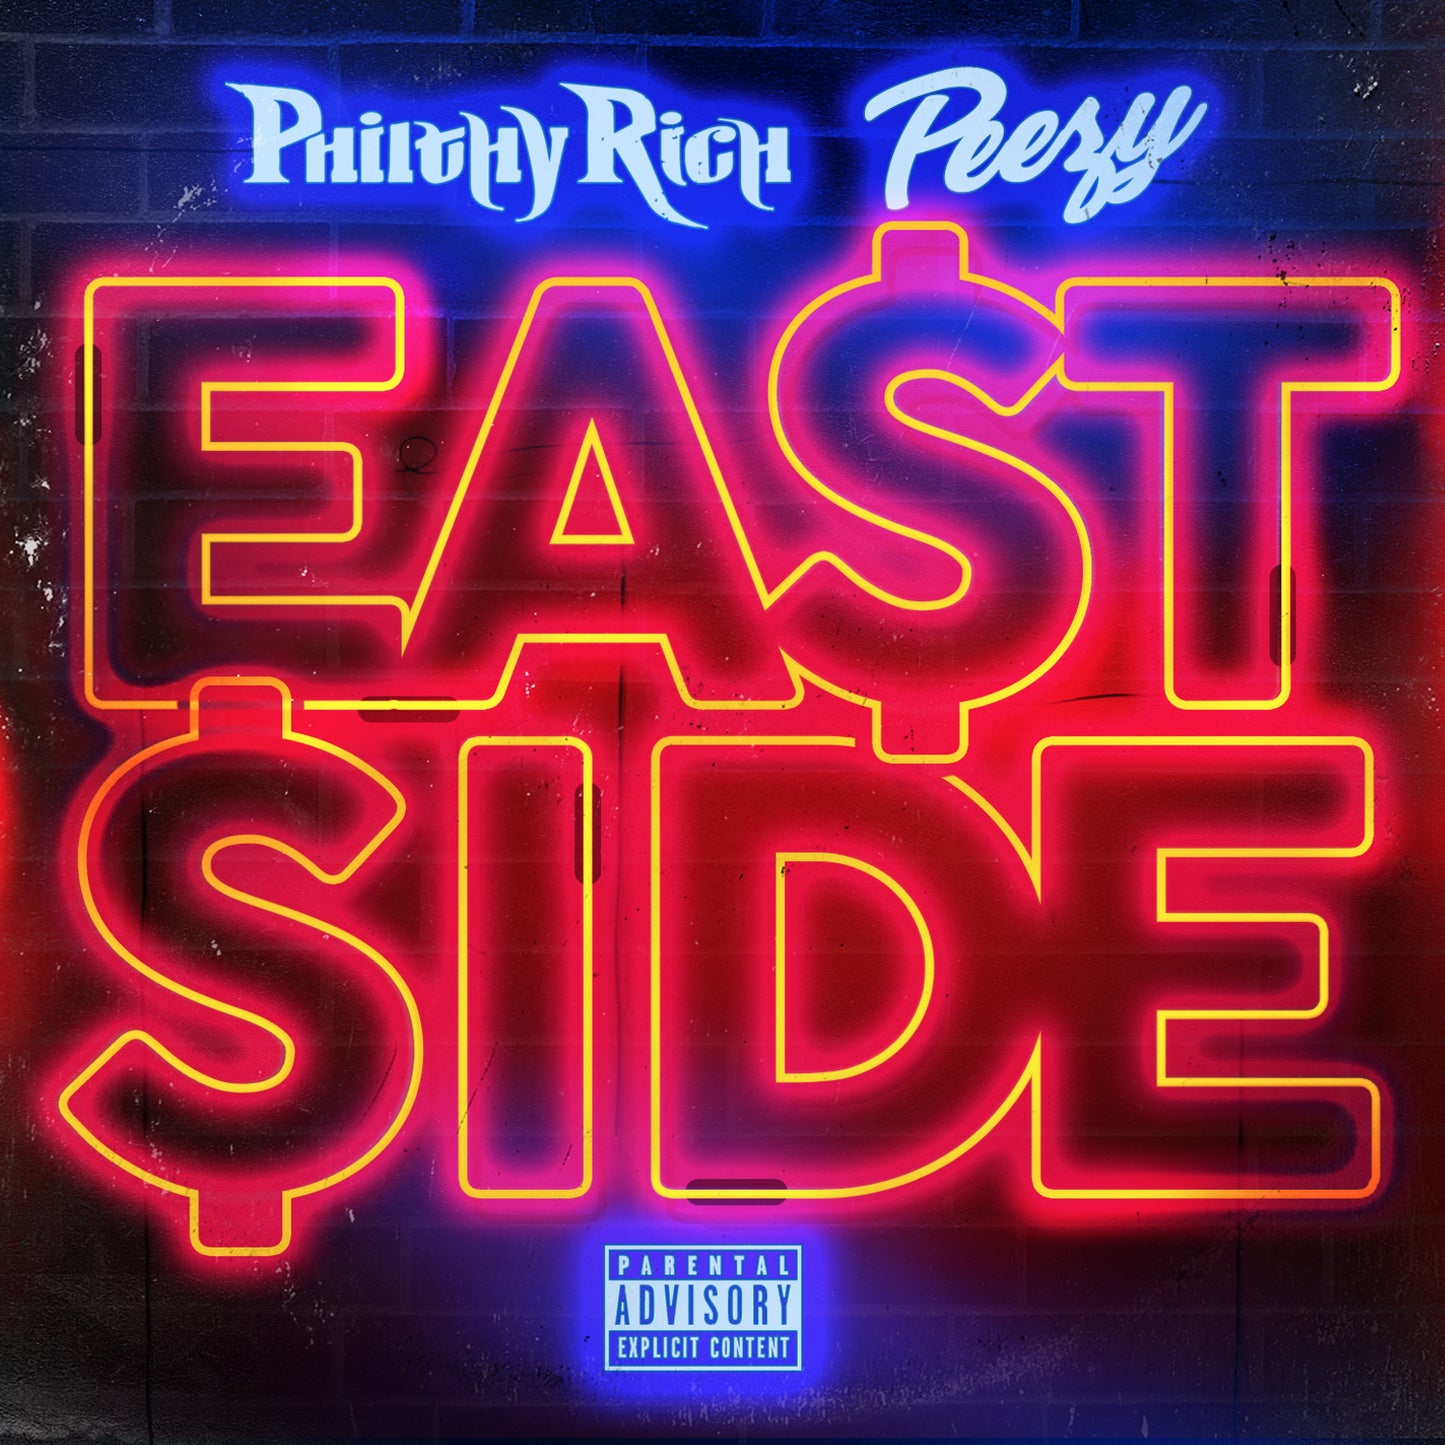 Philthy Rich & Peezy - East Side (CD)